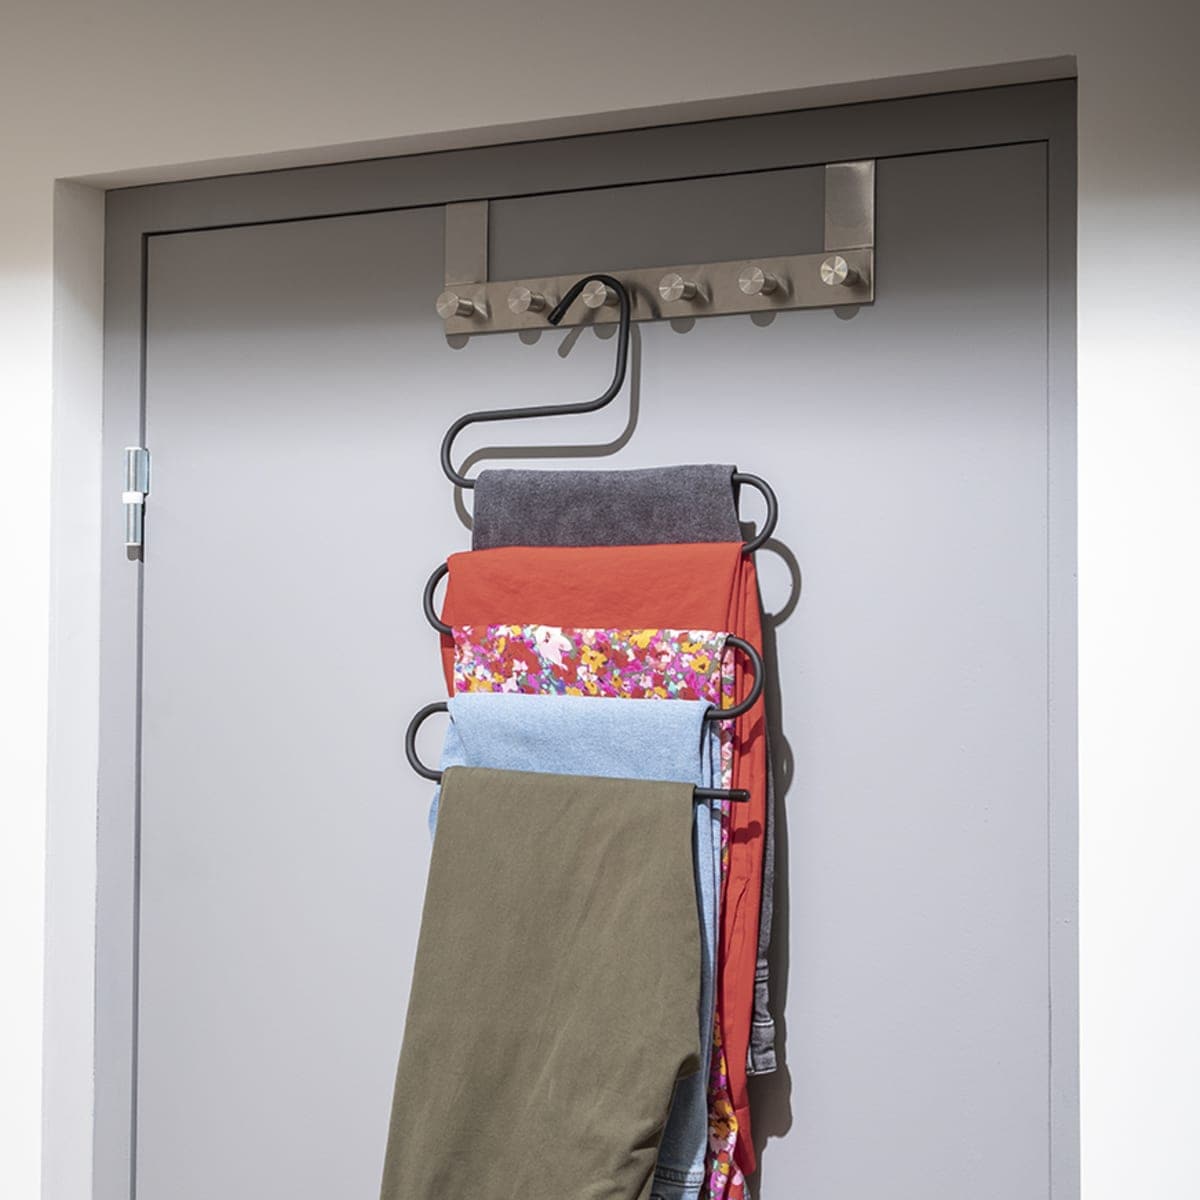 SPACEO SPACE-SAVING SOFT TOUCH NON-SLIP HANGER FOR 5 TROUSERS - best price from Maltashopper.com BR410001403